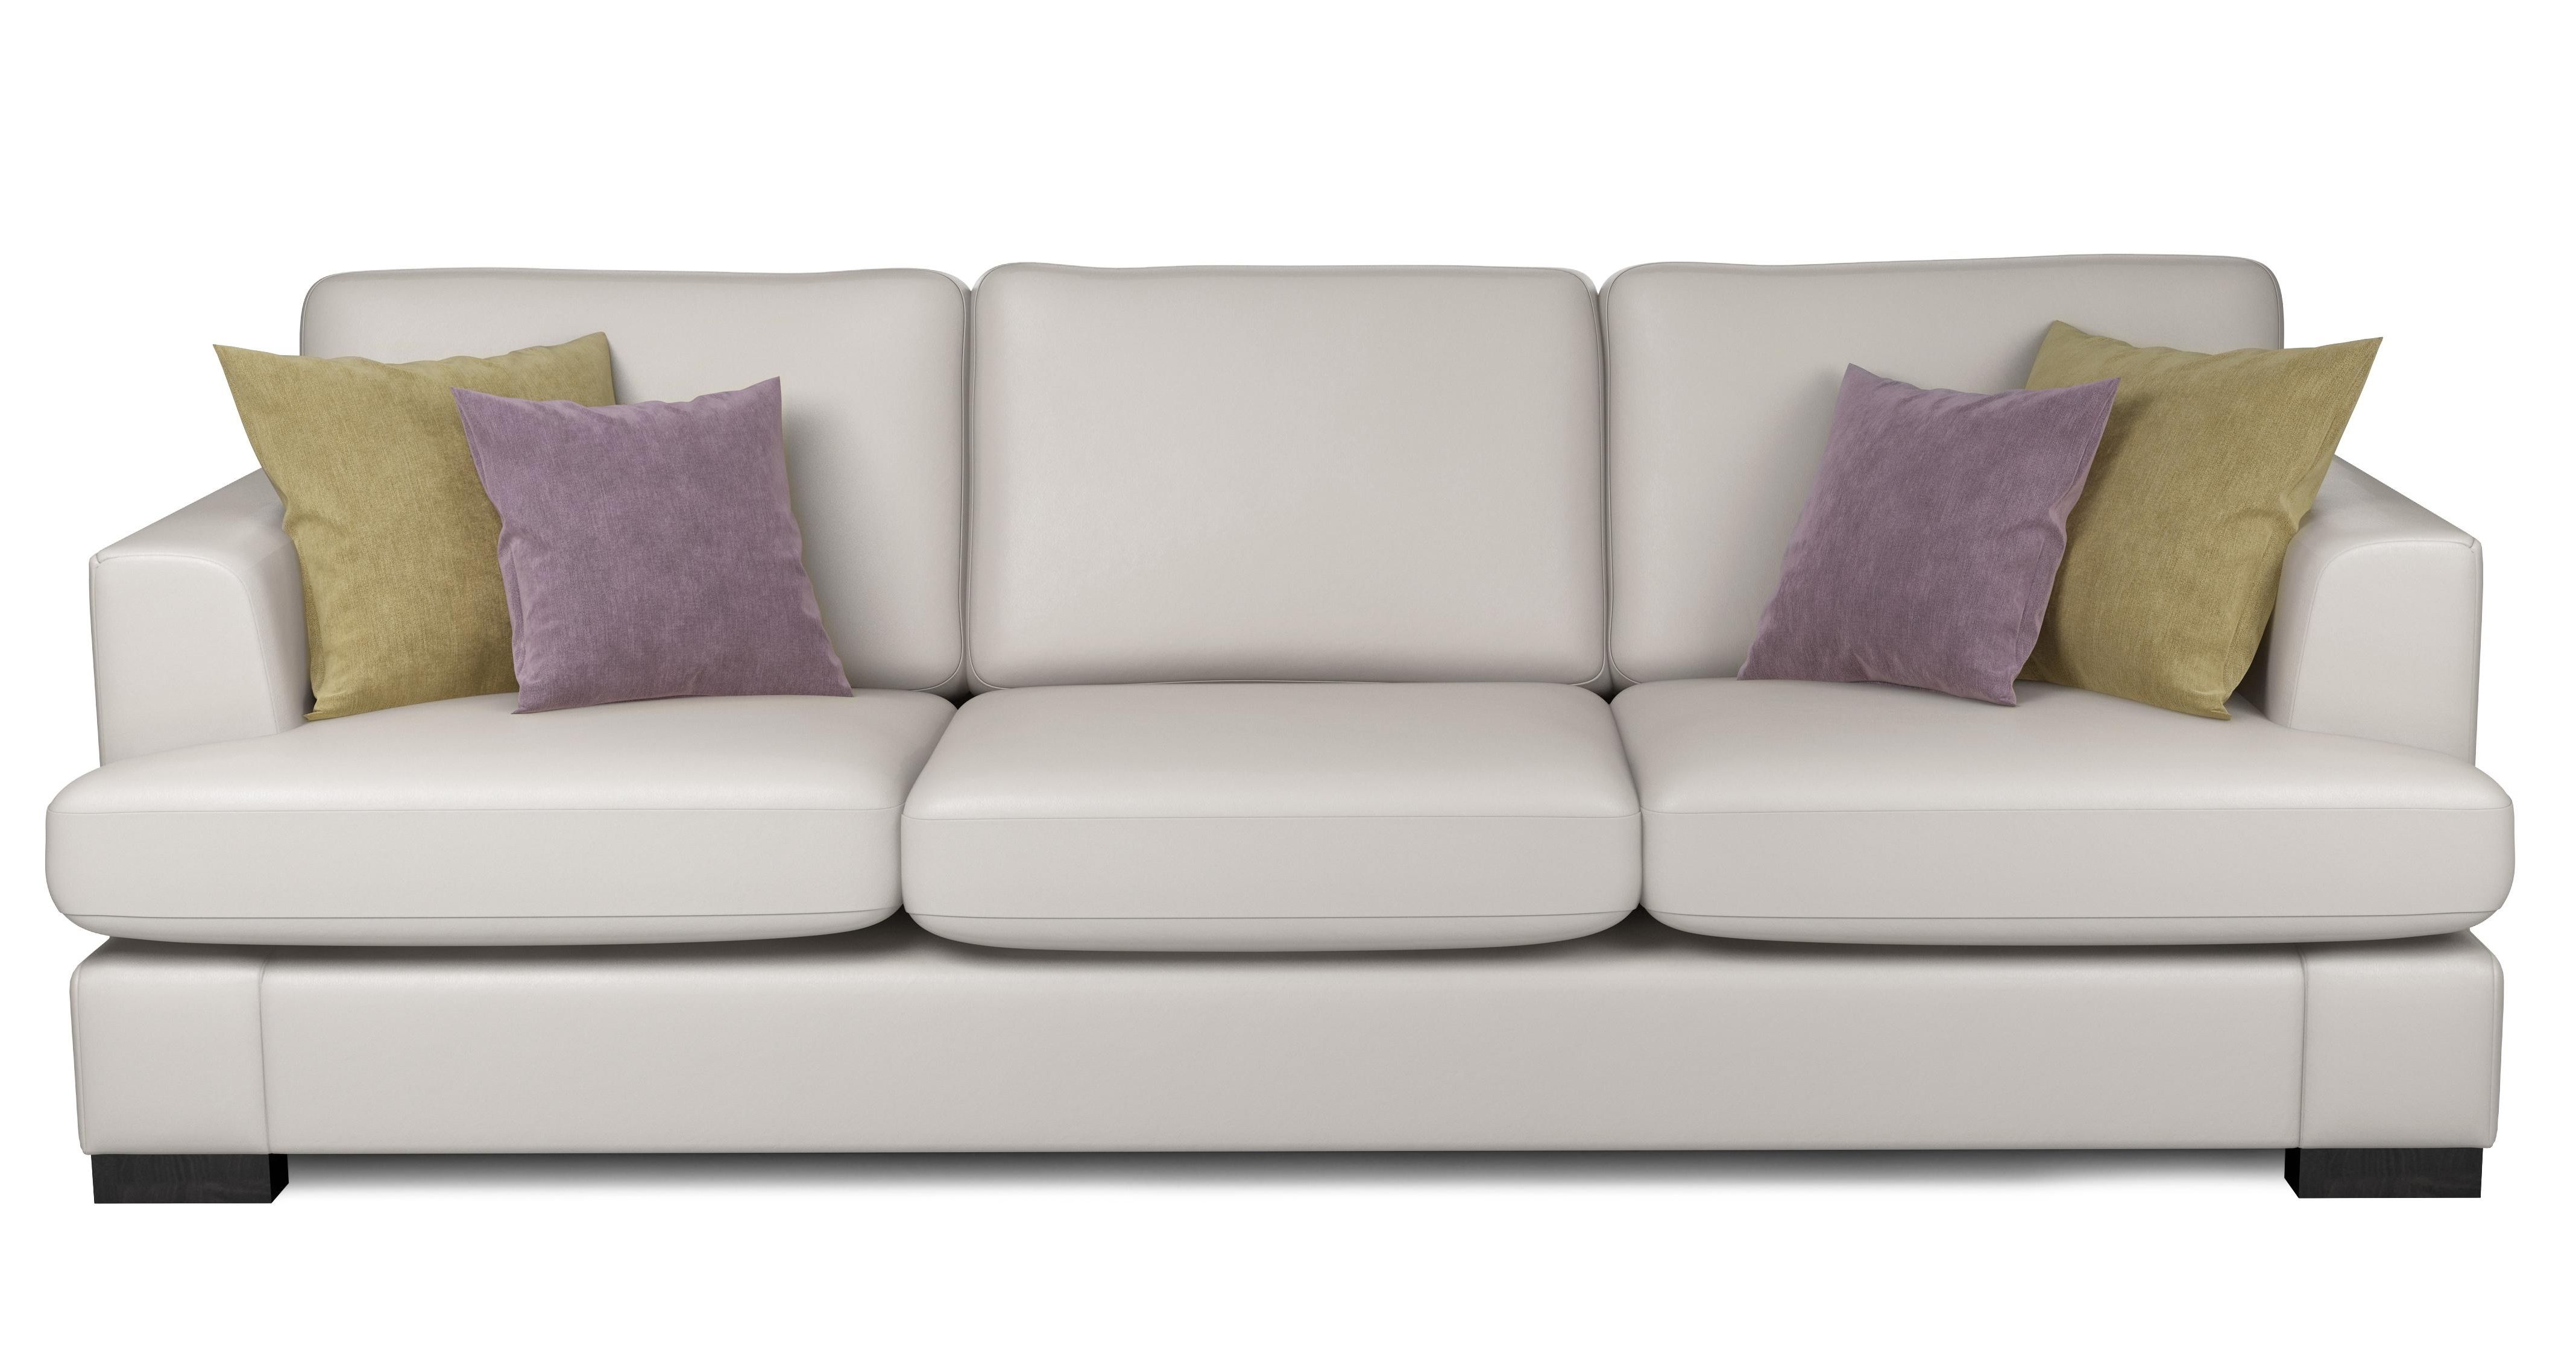 Popular 4 Seater Leather Sofa – Home And Textiles For Four Seater Sofas (View 3 of 15)